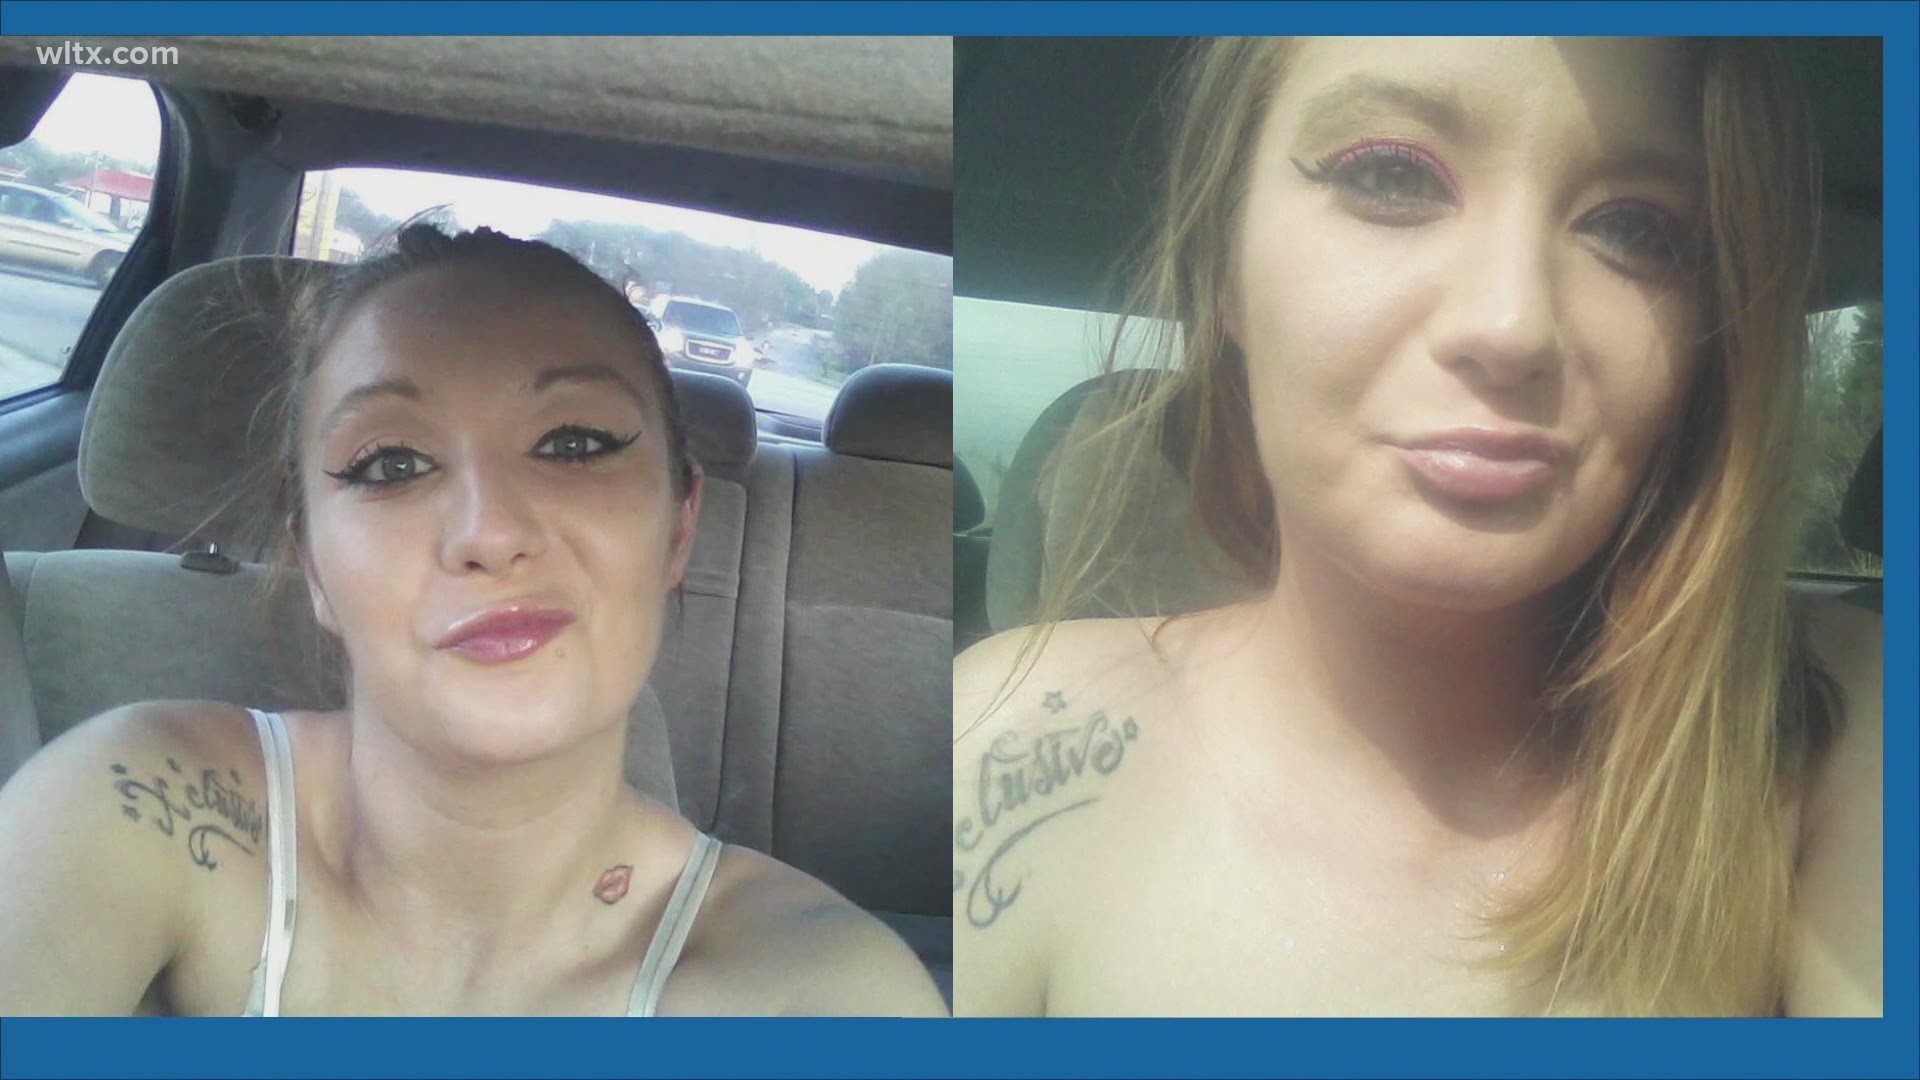 Cristina Michelle Lee Beason was reported missing and possibly in danger, according to The Orangeburg Department of Public Safety